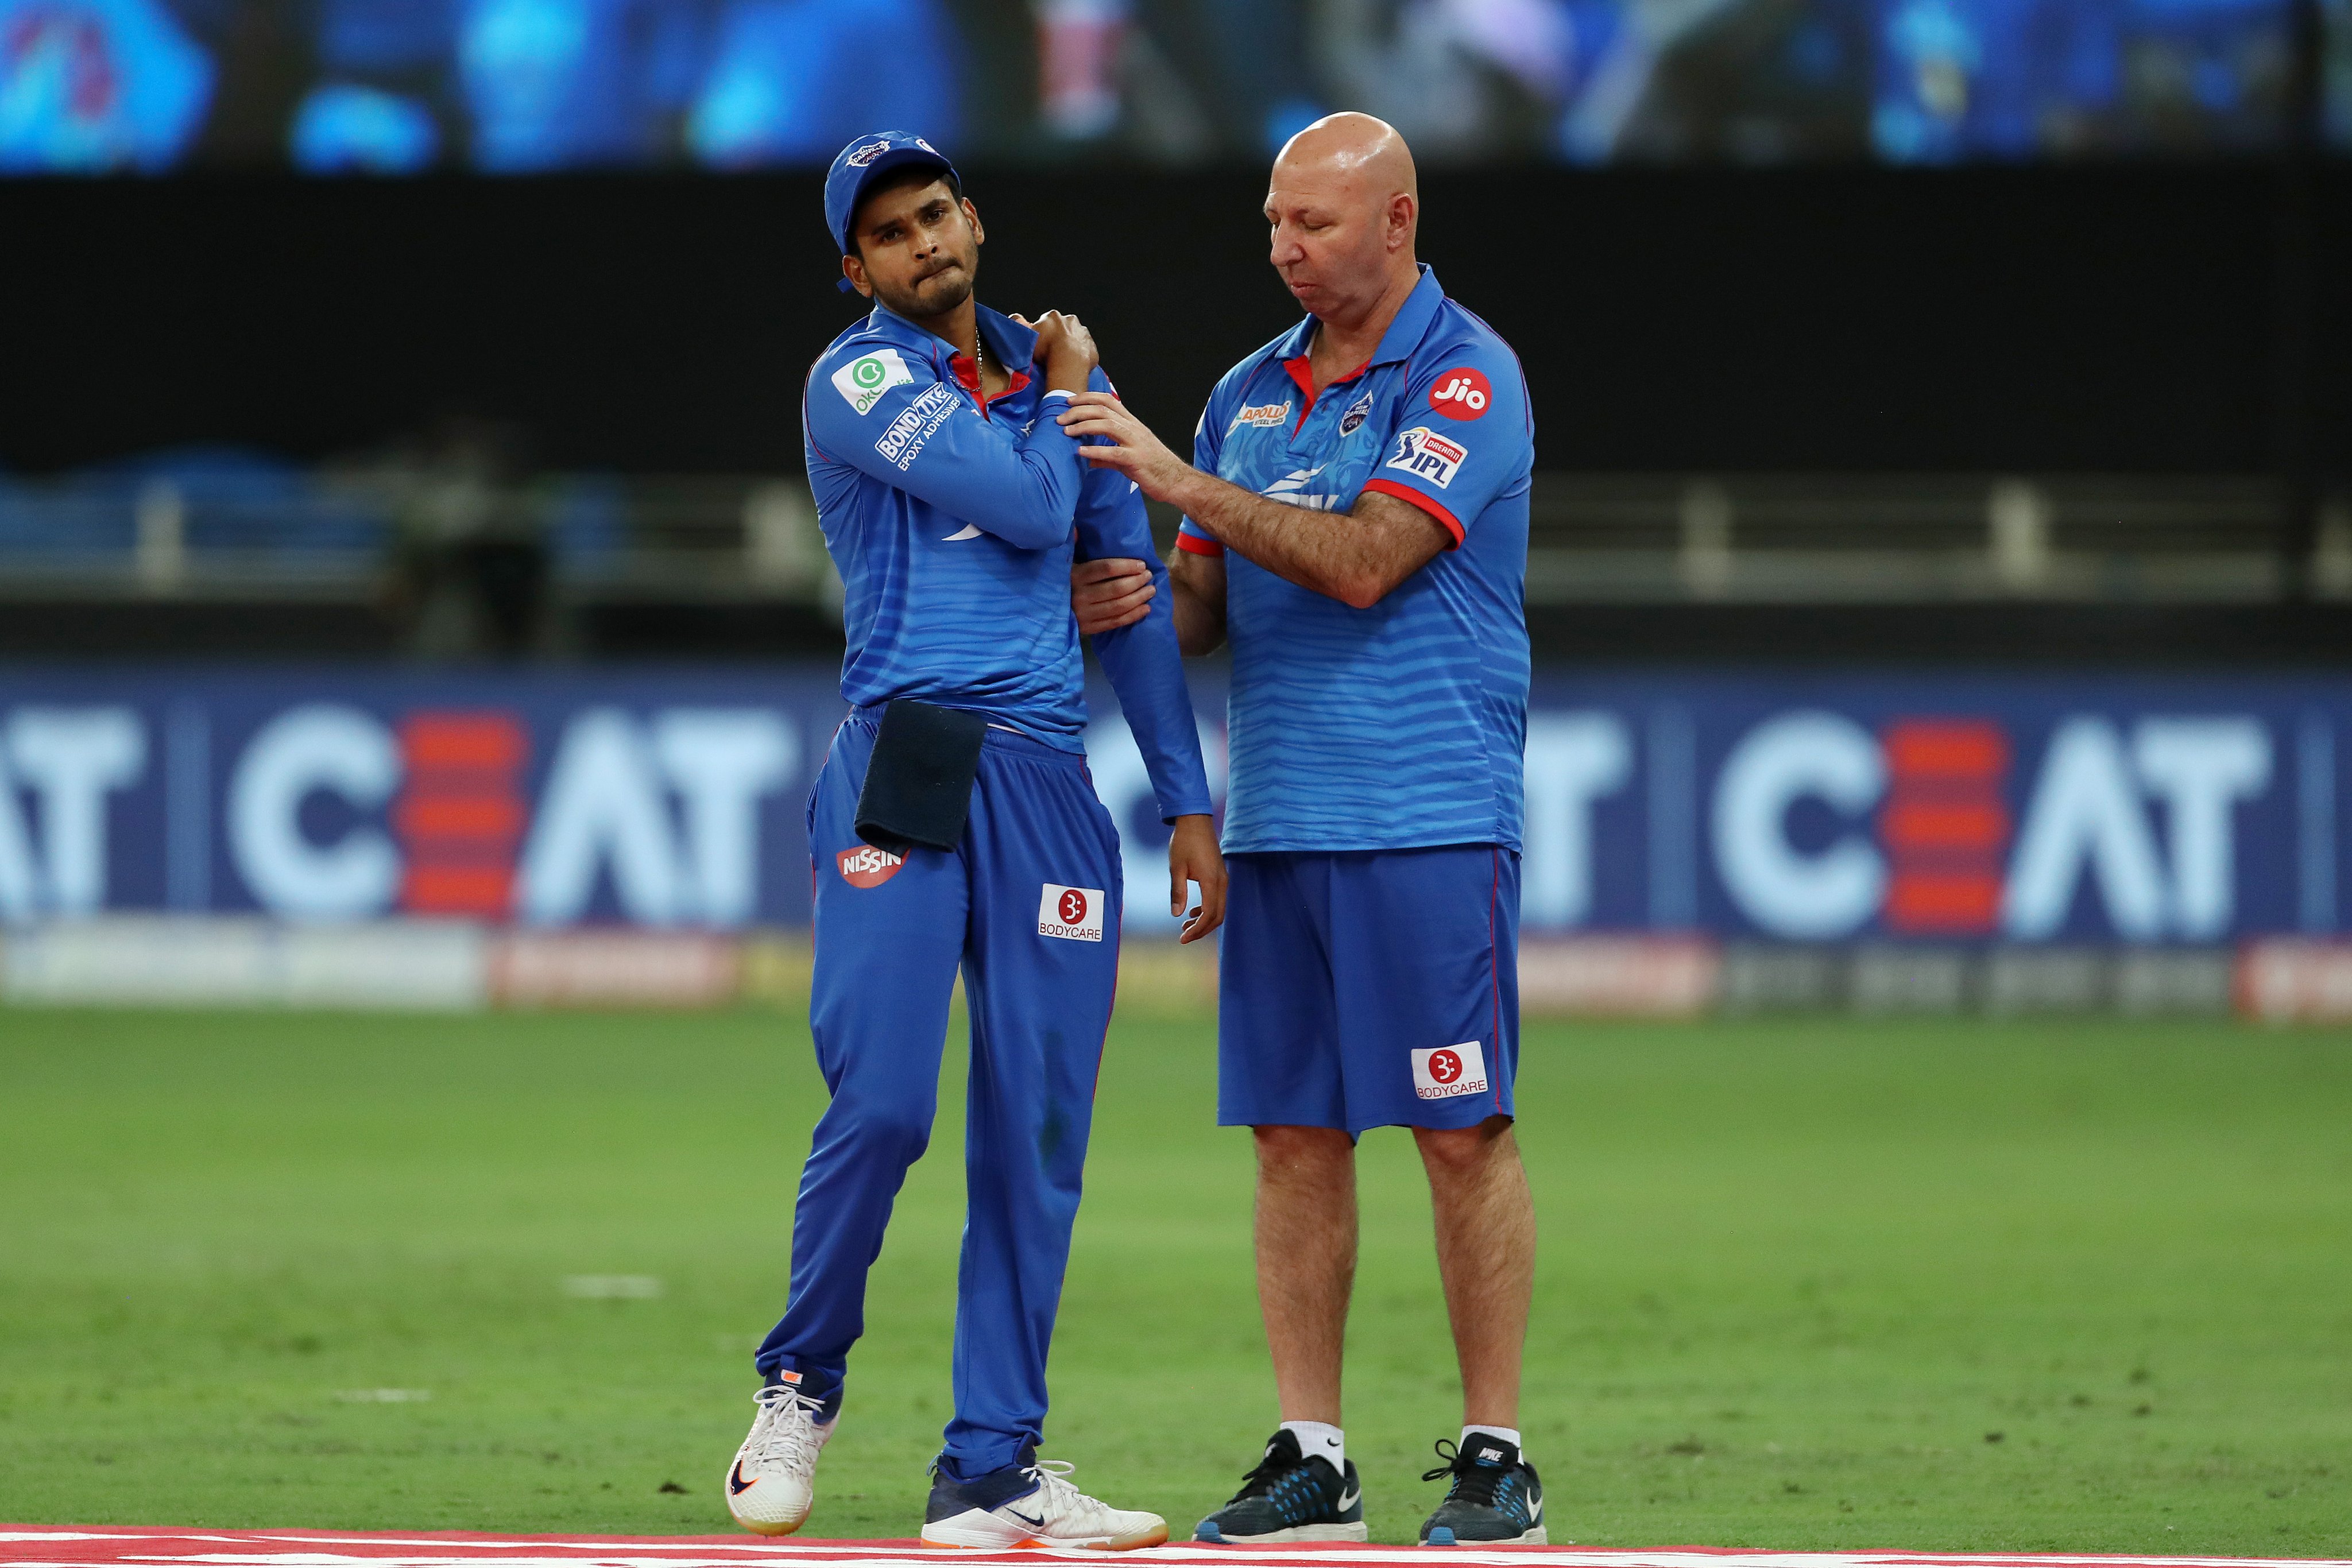 How big a role Iyer's shoulder injury might play remains to be seen | BCCI/IPL